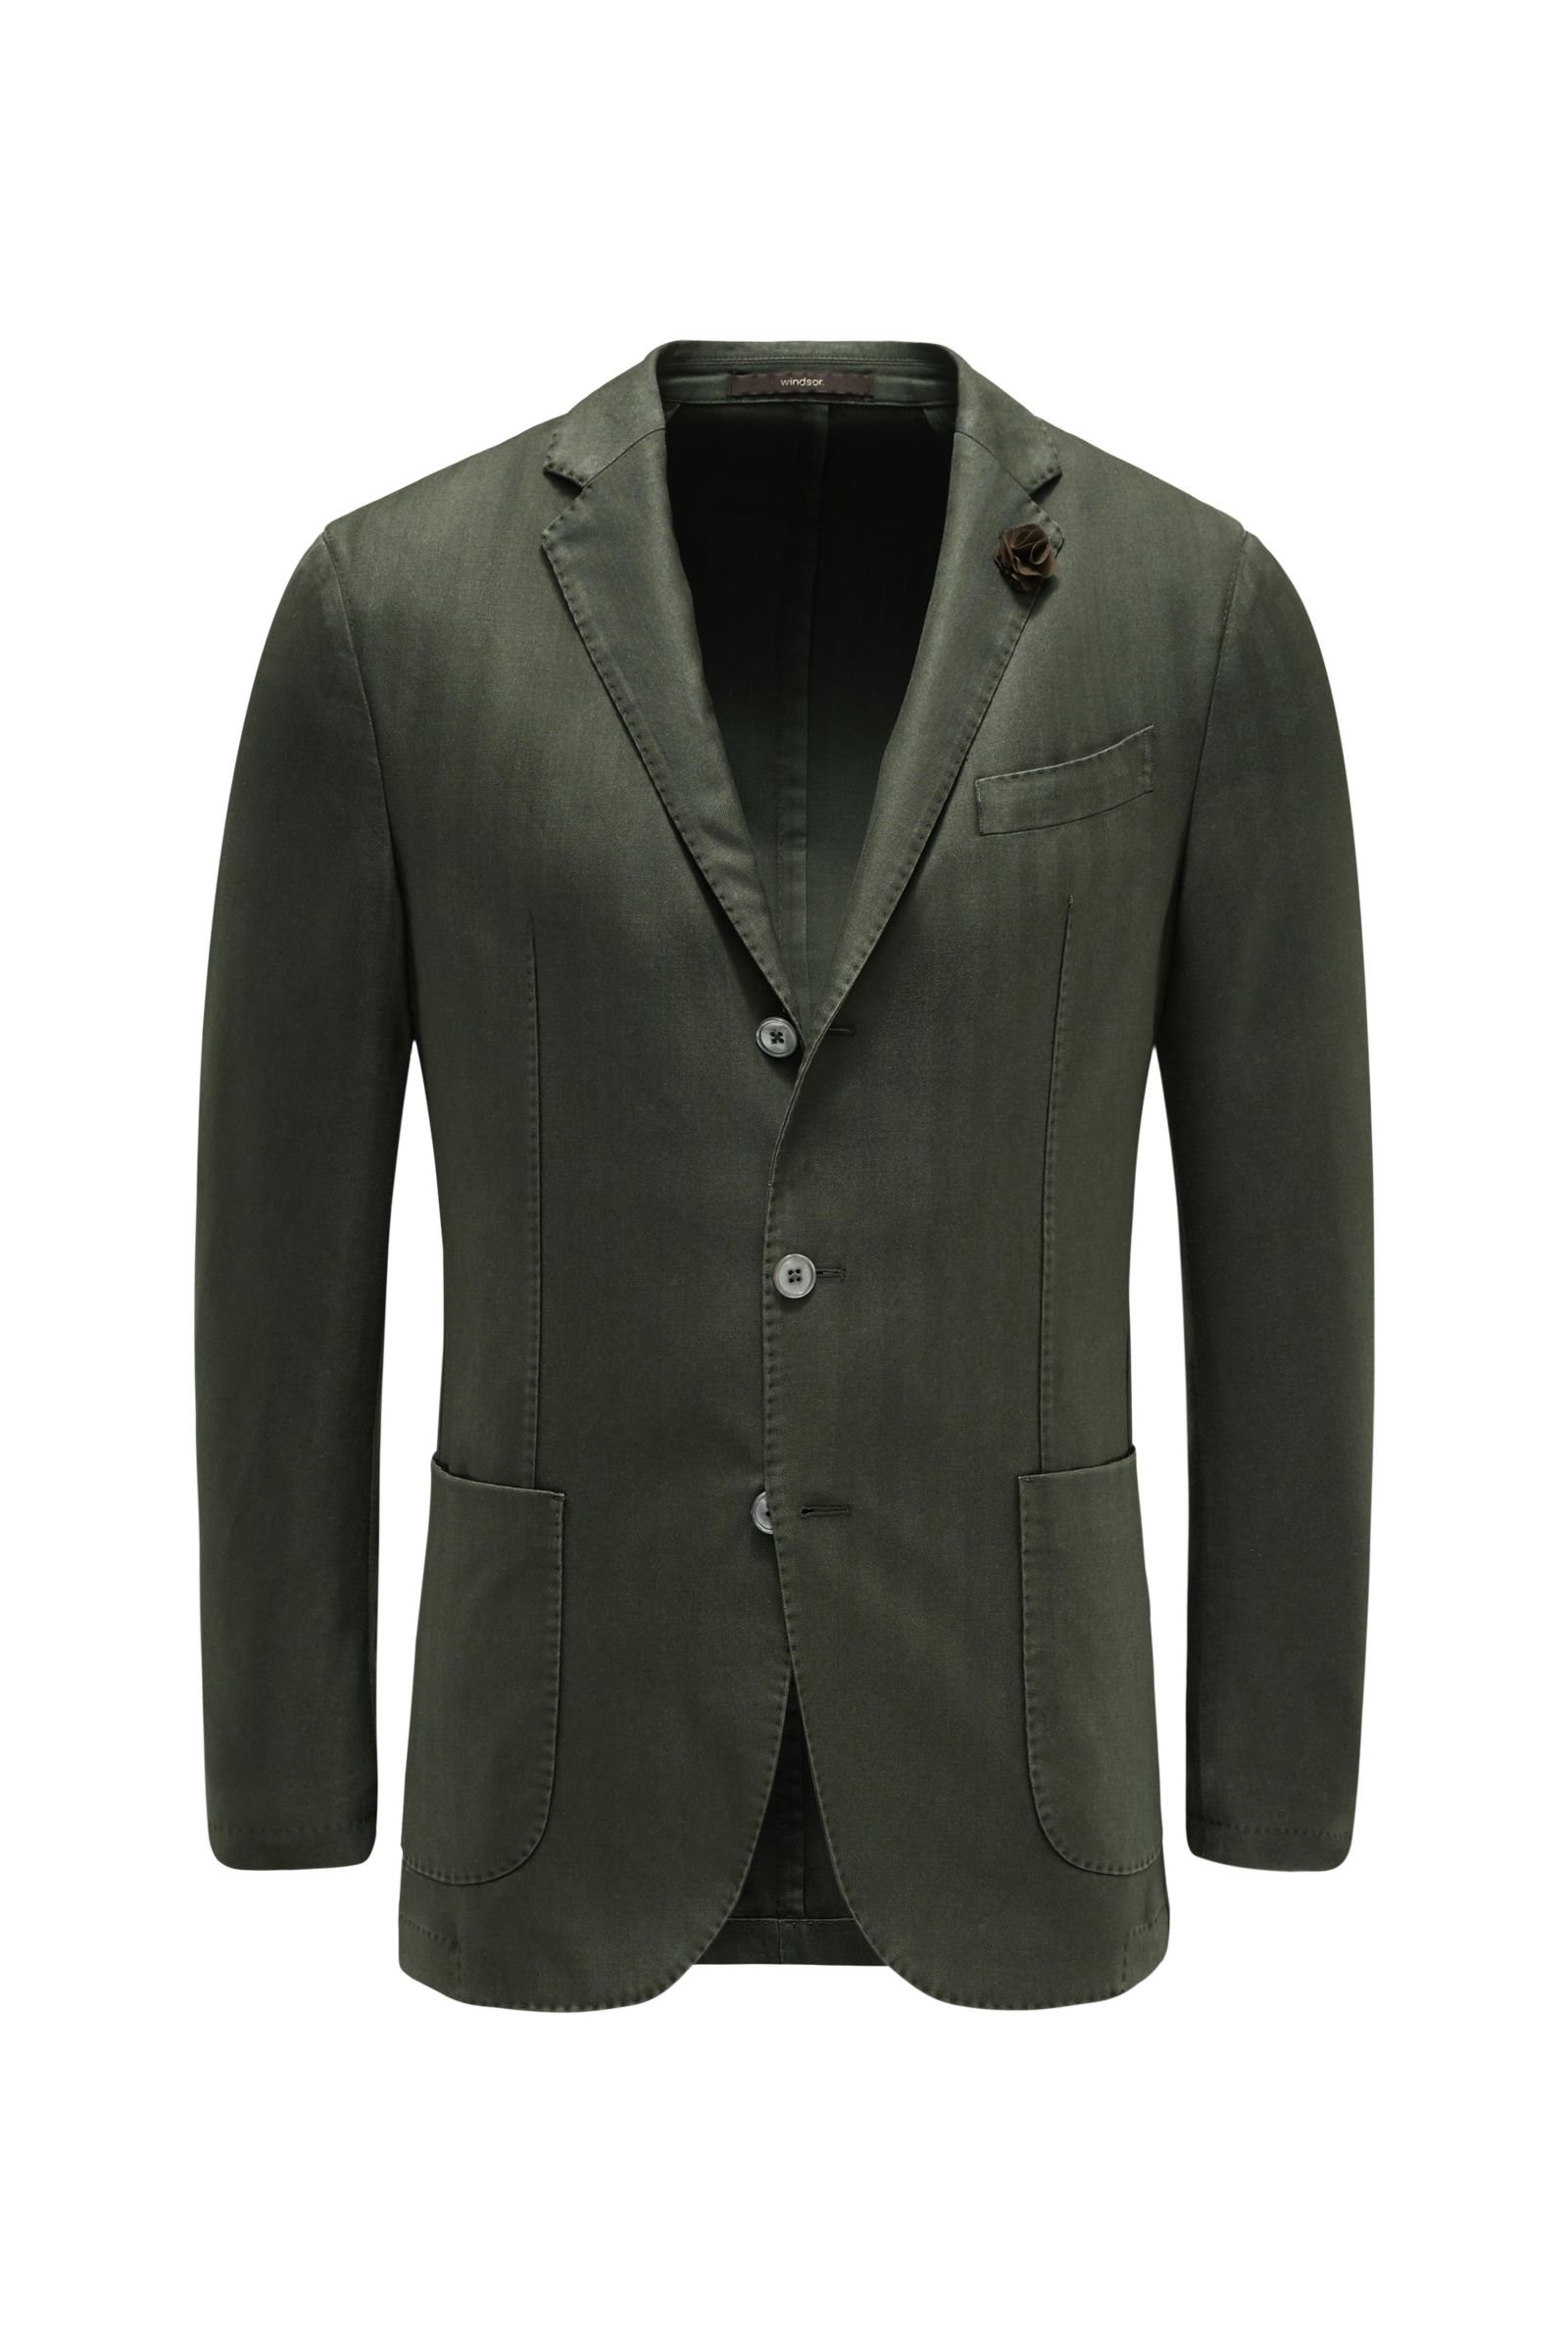 Smart-casual jacket 'Camicia' olive